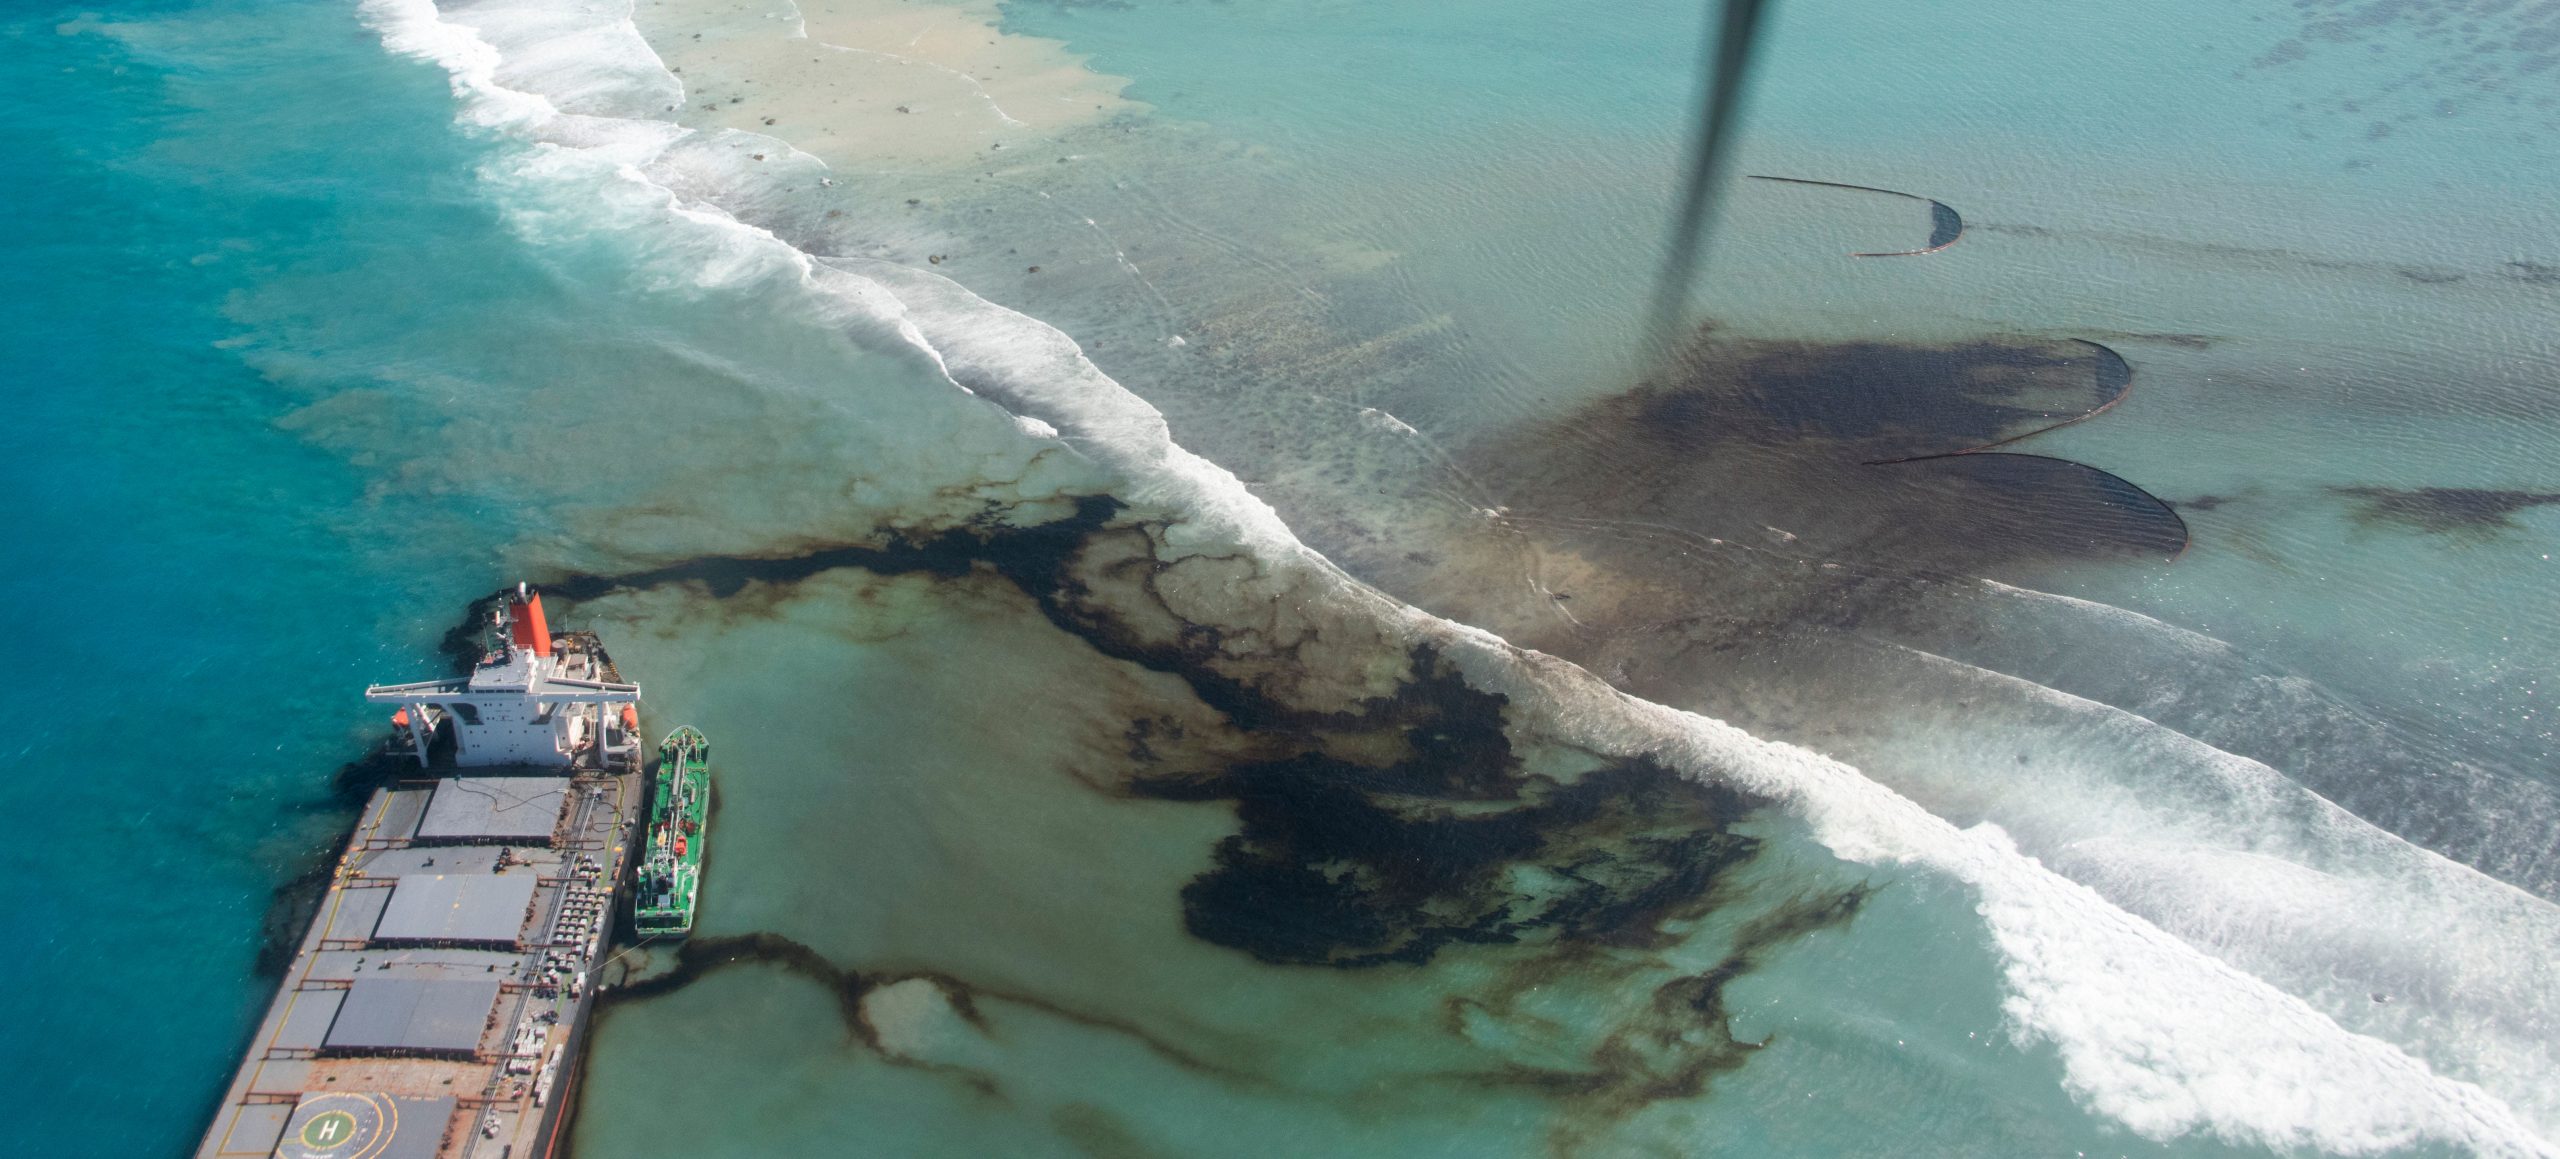 Ship that caused oil spill in the Indian Ocean sunk off Mauritius